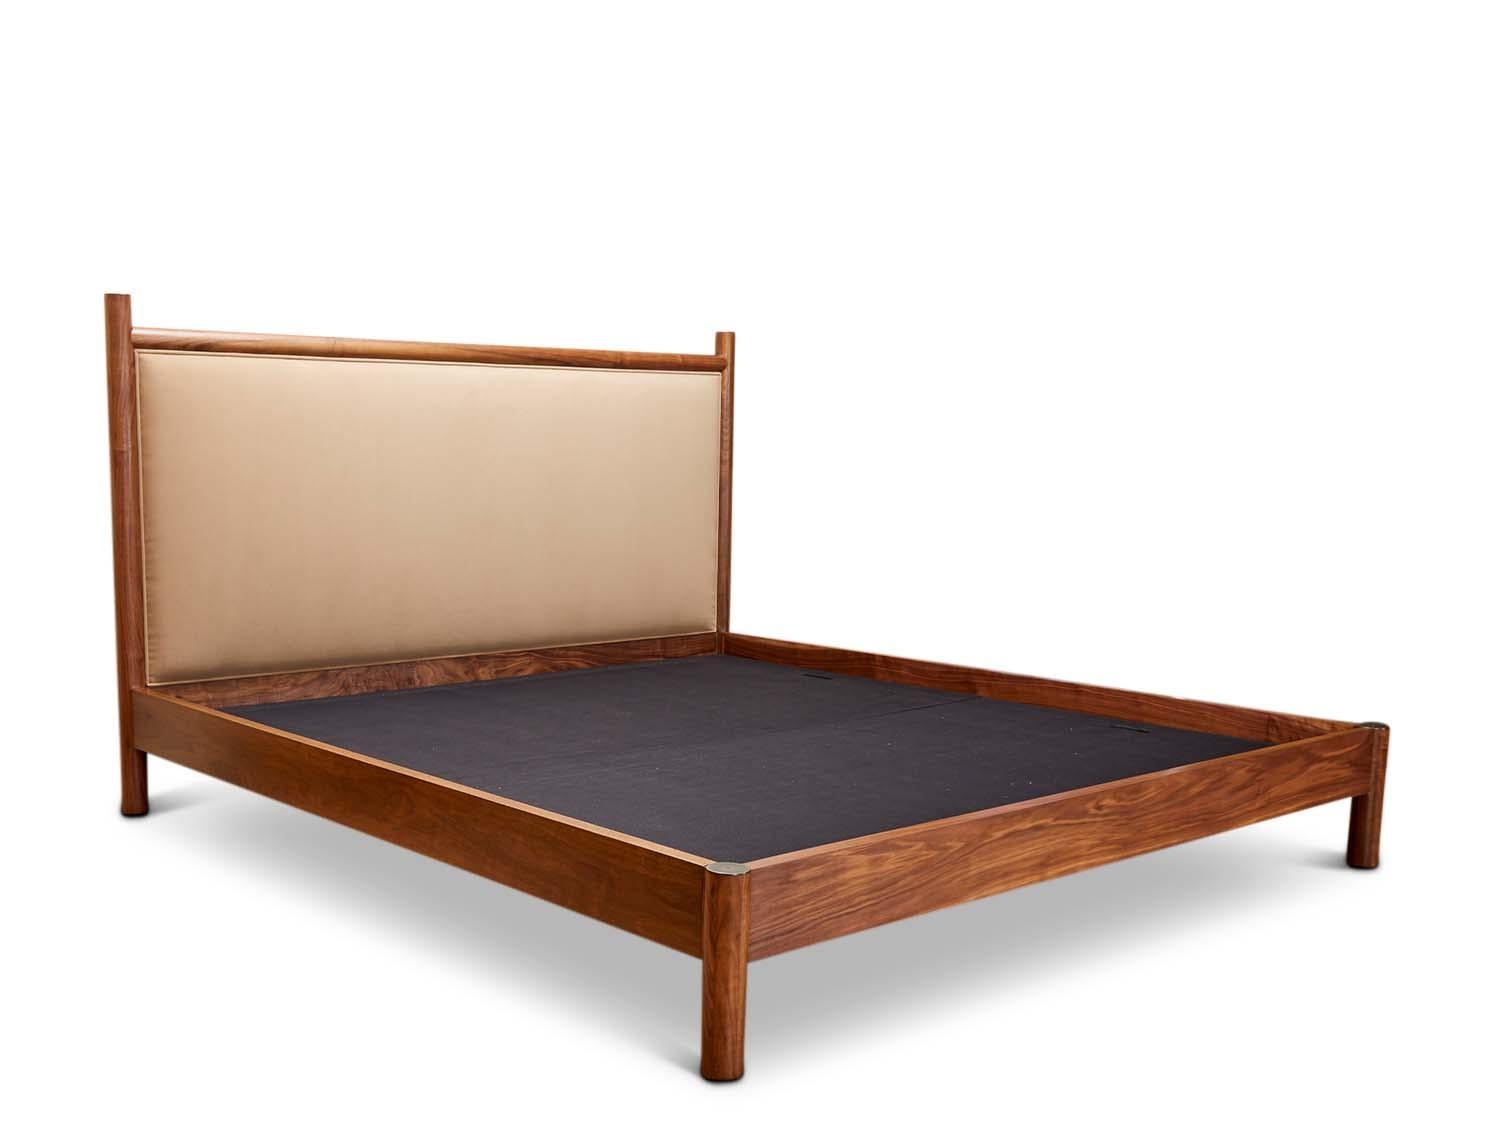 The Chiselhurst bed is an upholstered bed with a solid American walnut or white oak frame finished with brass caps. Slats are provided. Available with or without footboard. 

The Lawson-Fenning Collection is designed and handmade in Los Angeles,